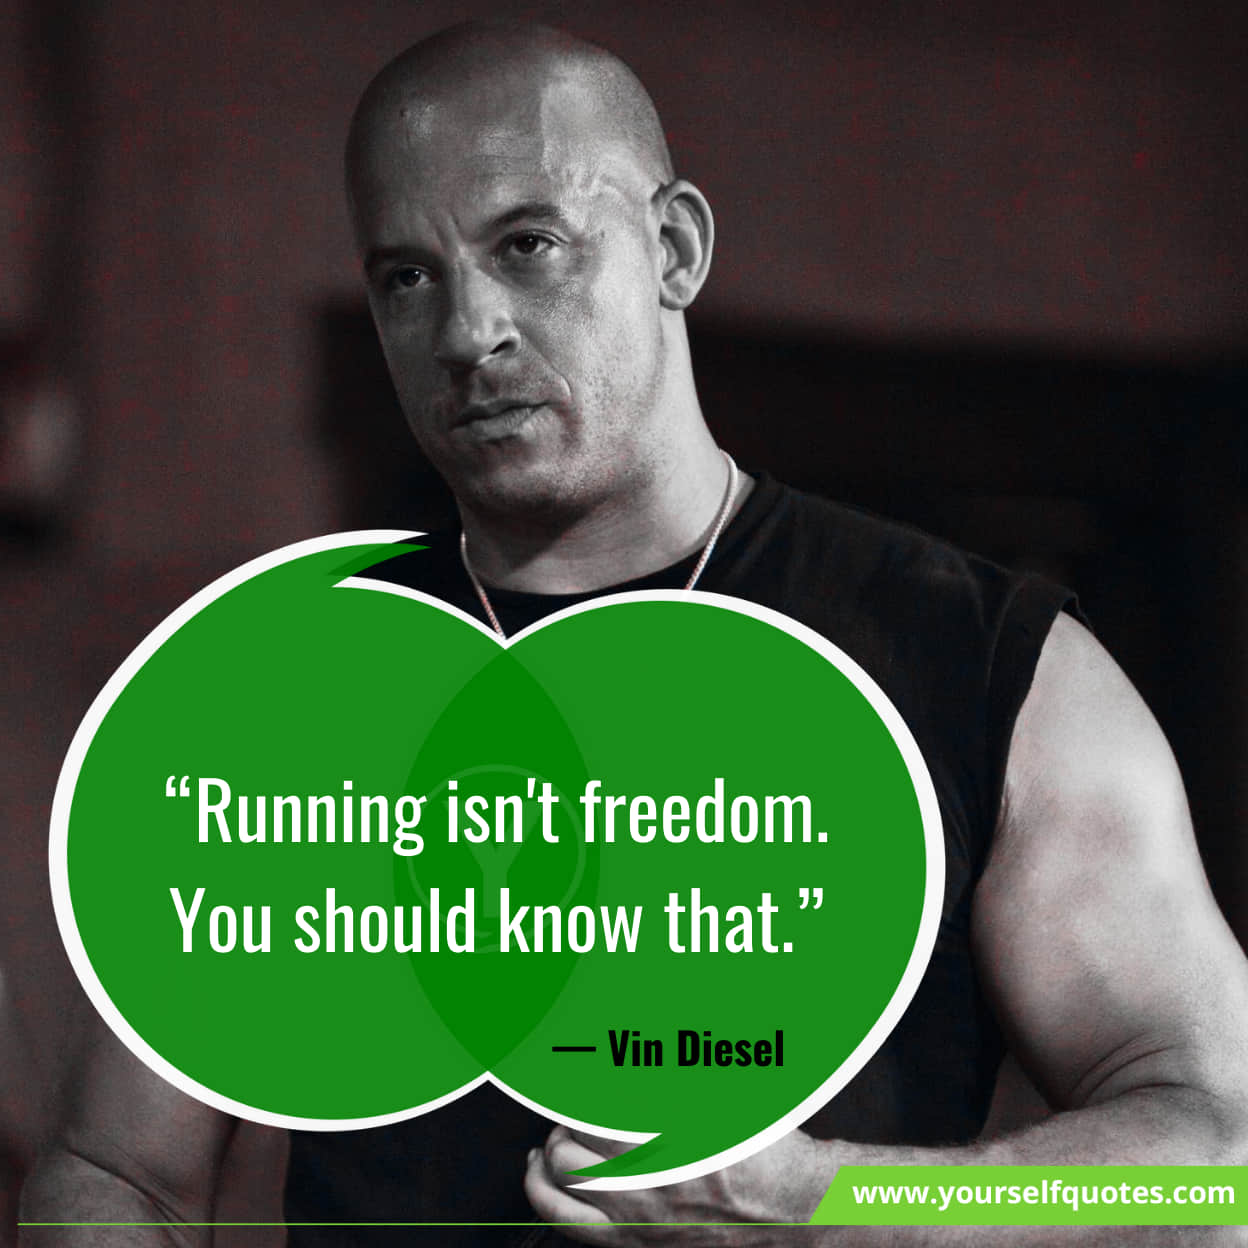 Vin Diesel Fast and Furious Quotes